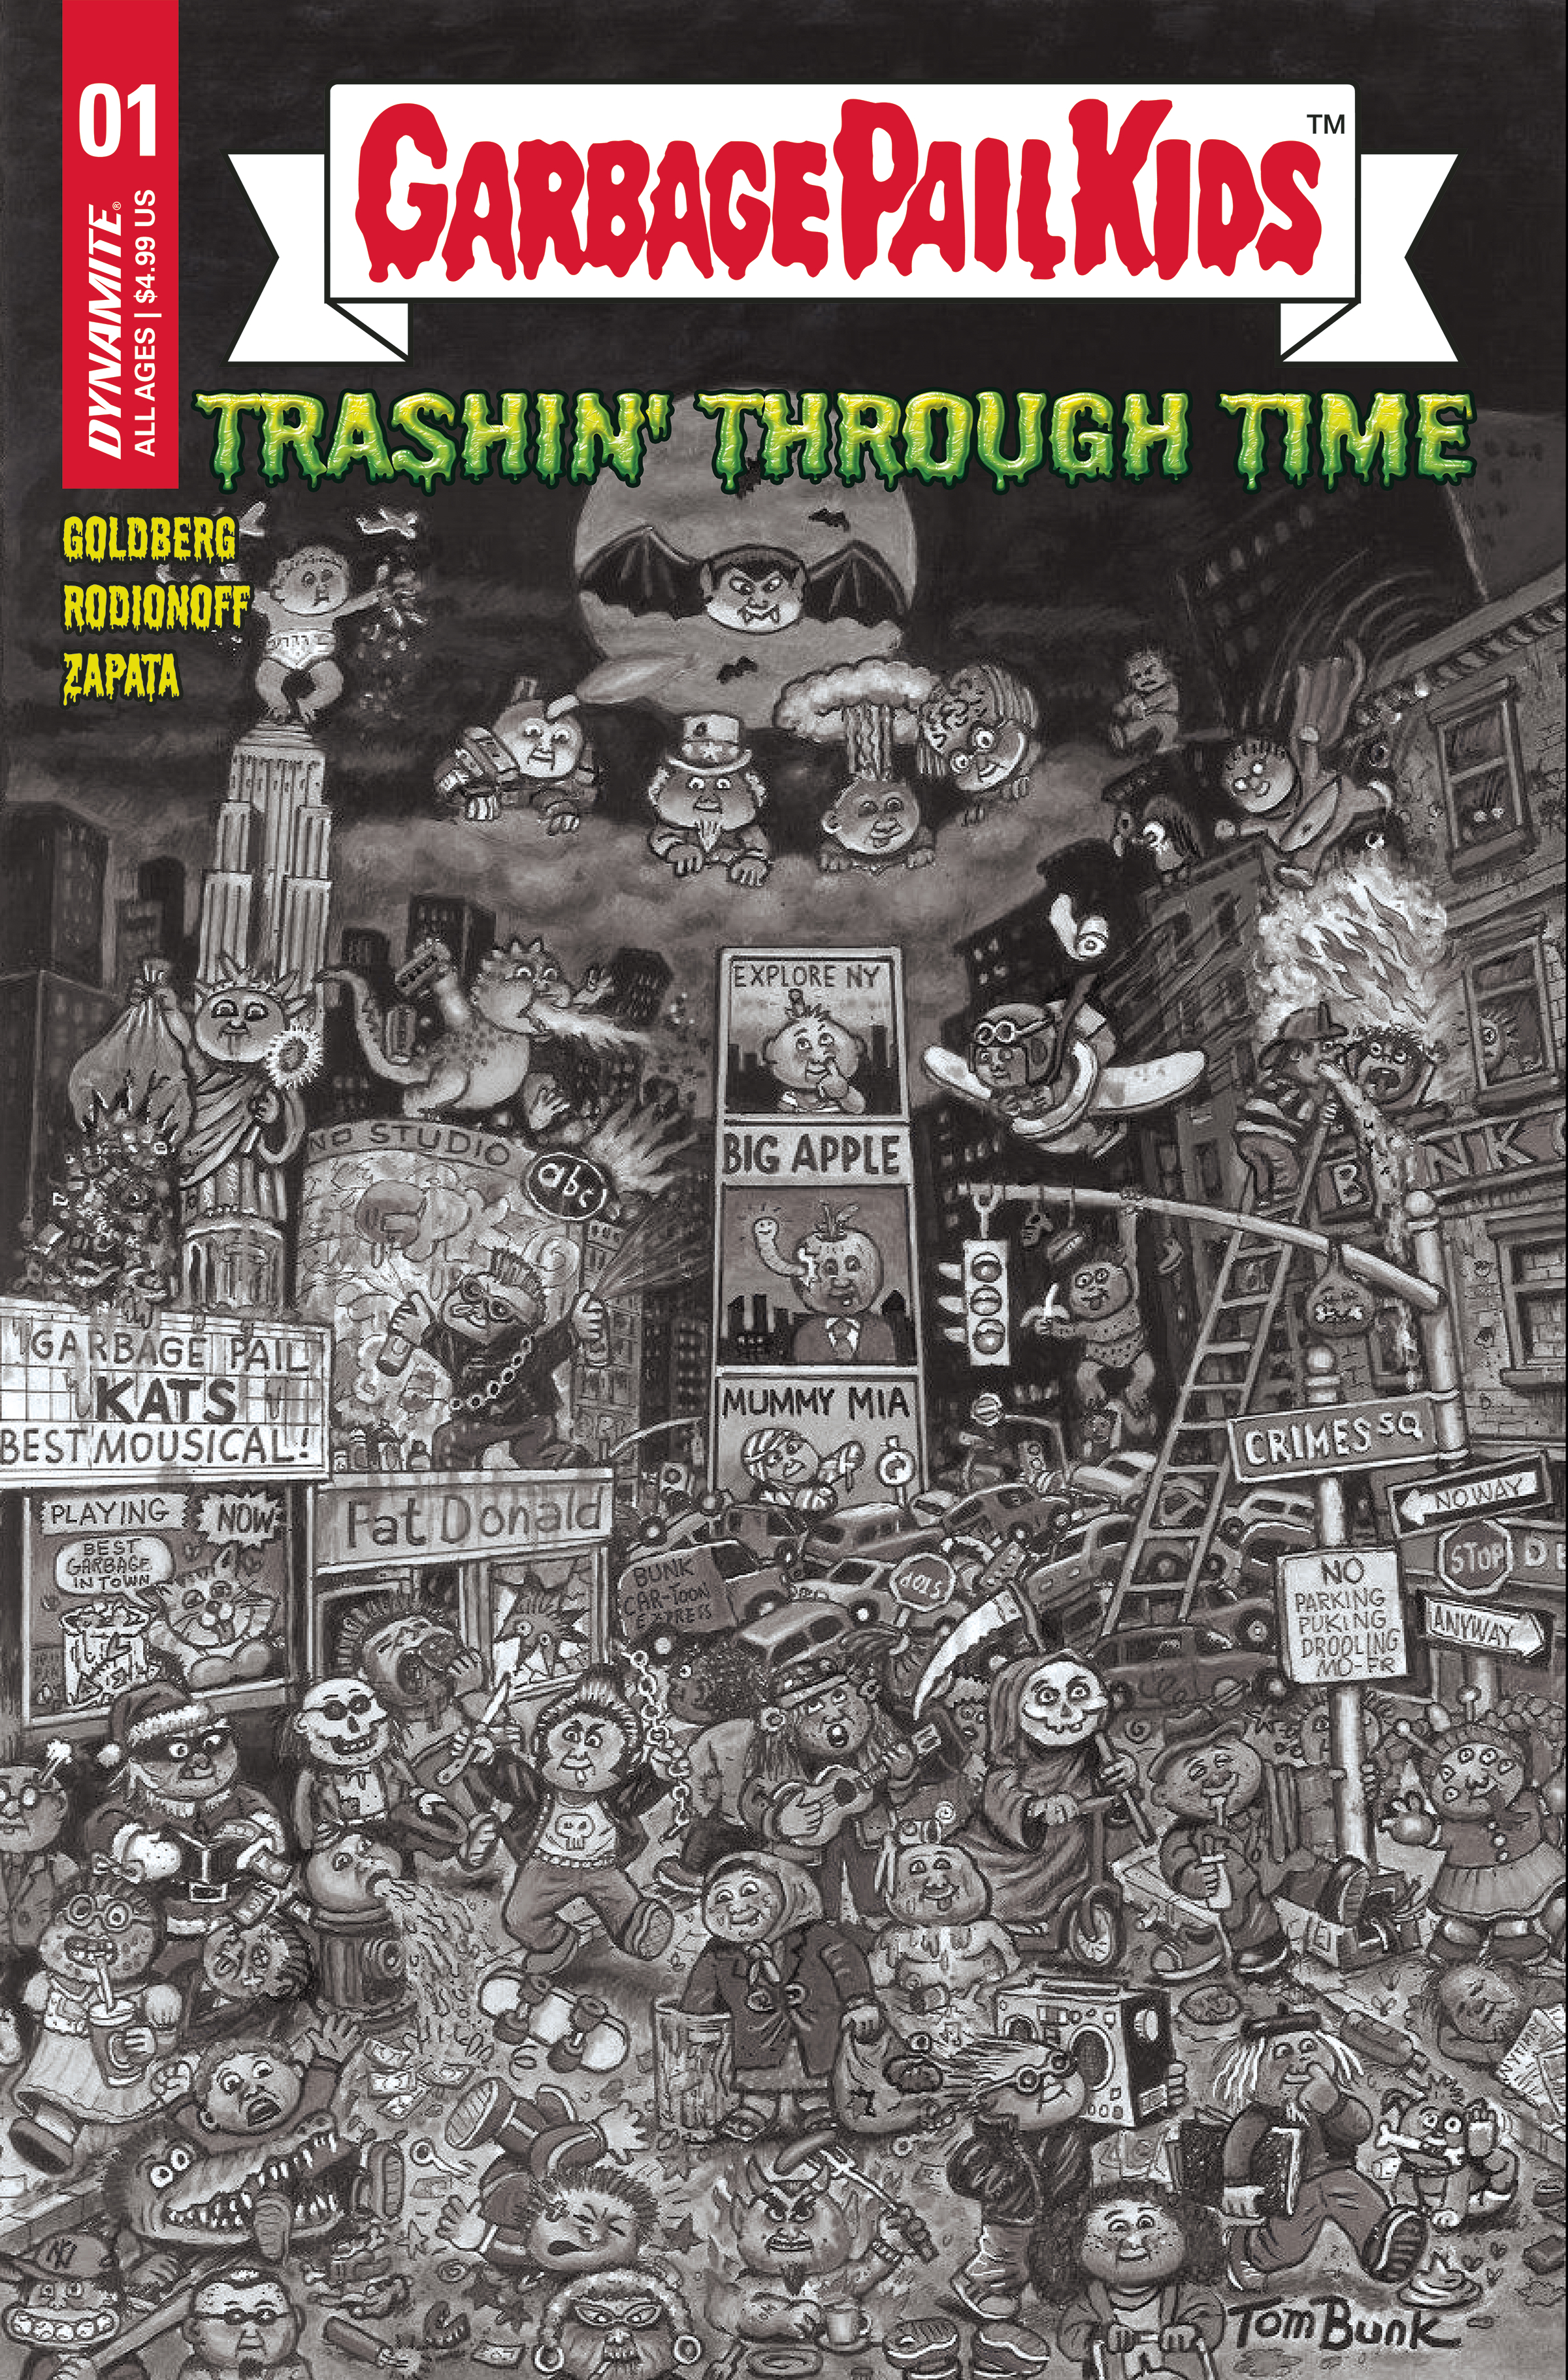 Garbage Pail Kids Through Time #1 Cover F 1 for 10 Incentive Bunk Black & White